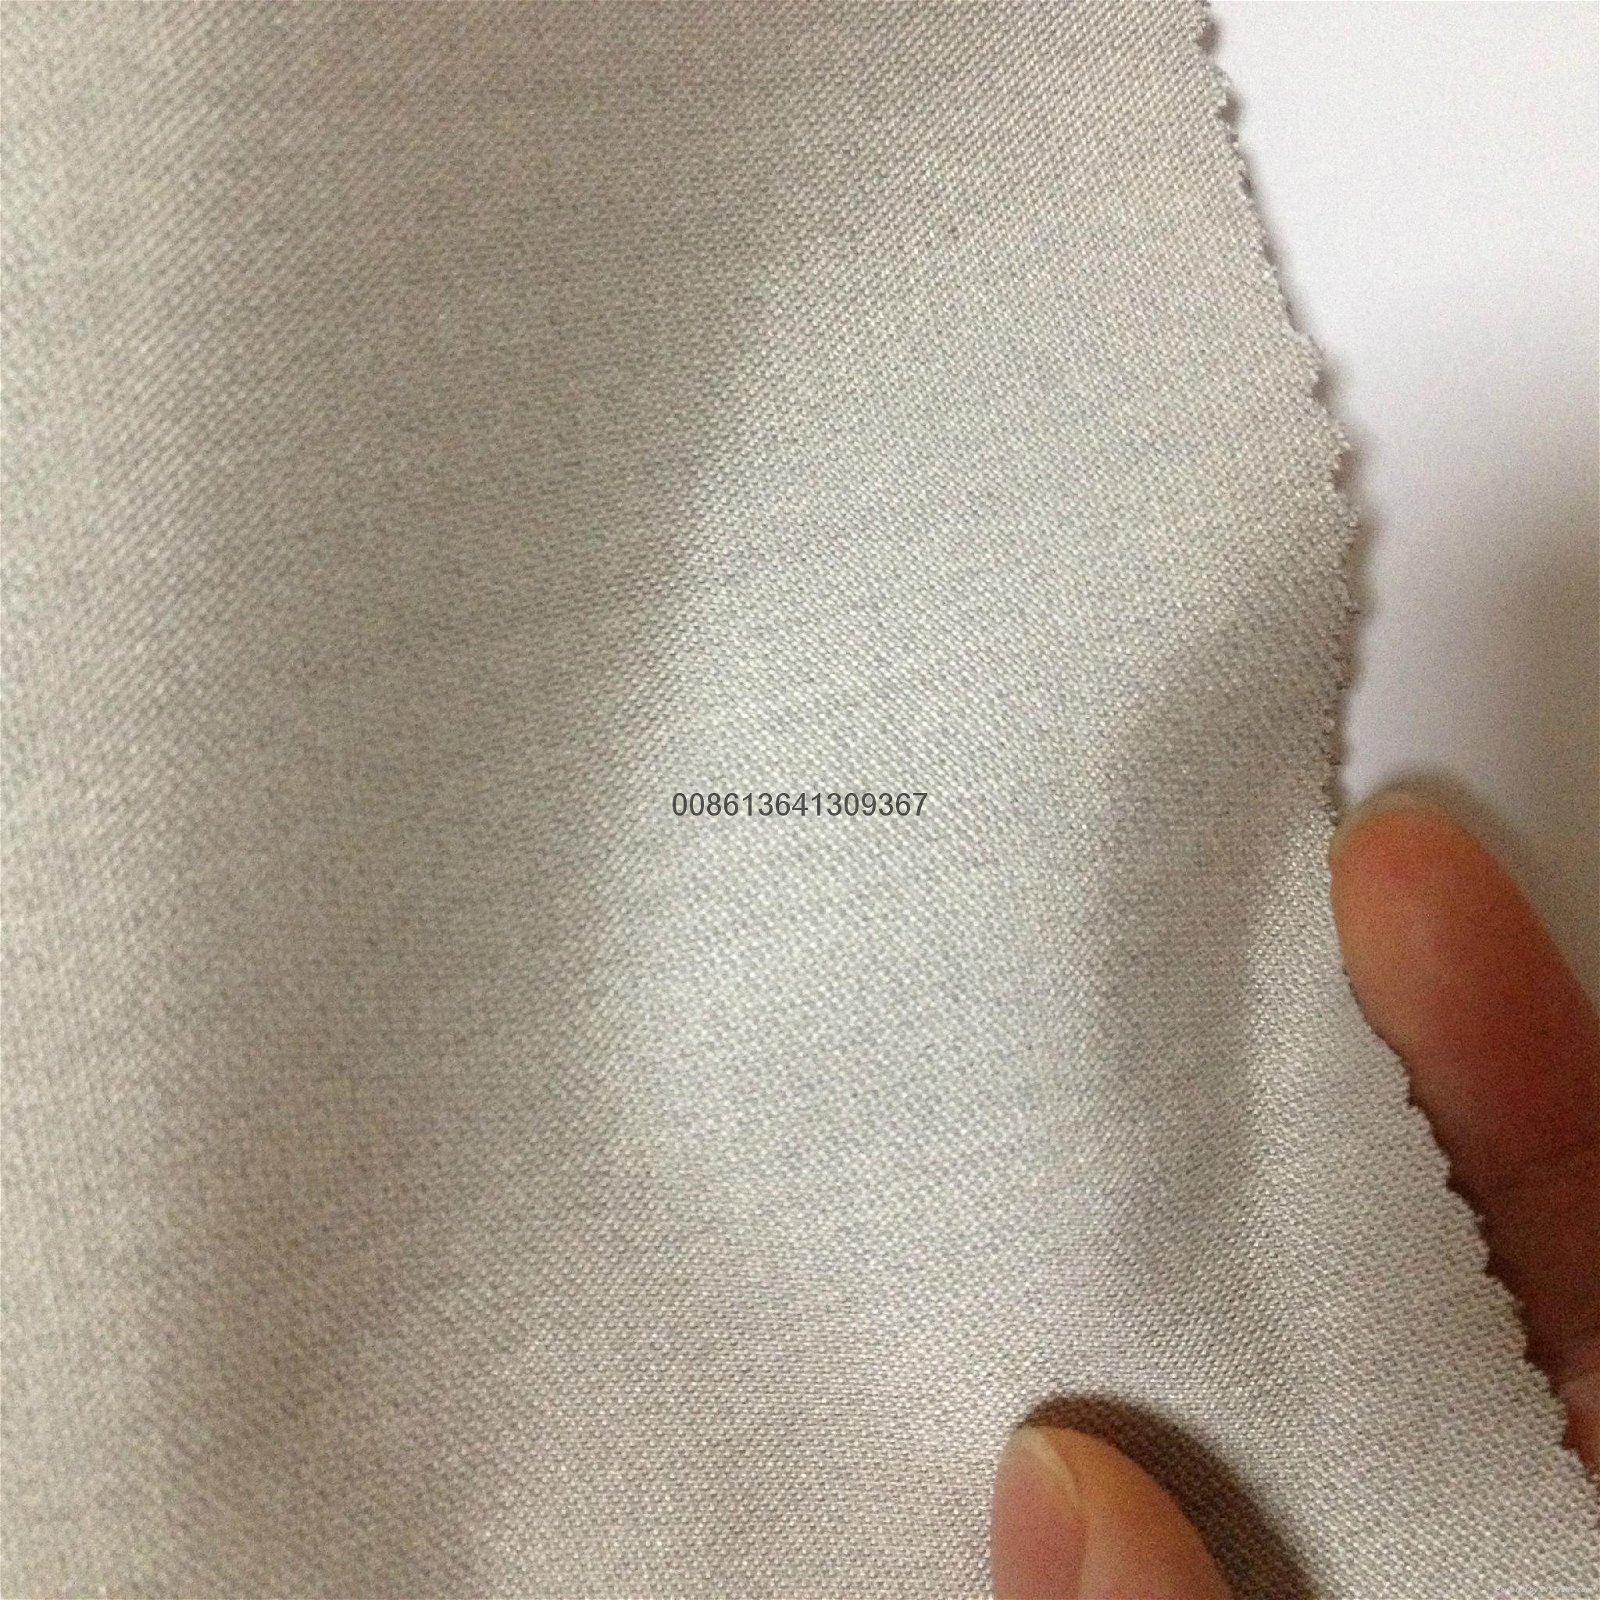 bamboo+silver emf fabric for radiation protection clothing 